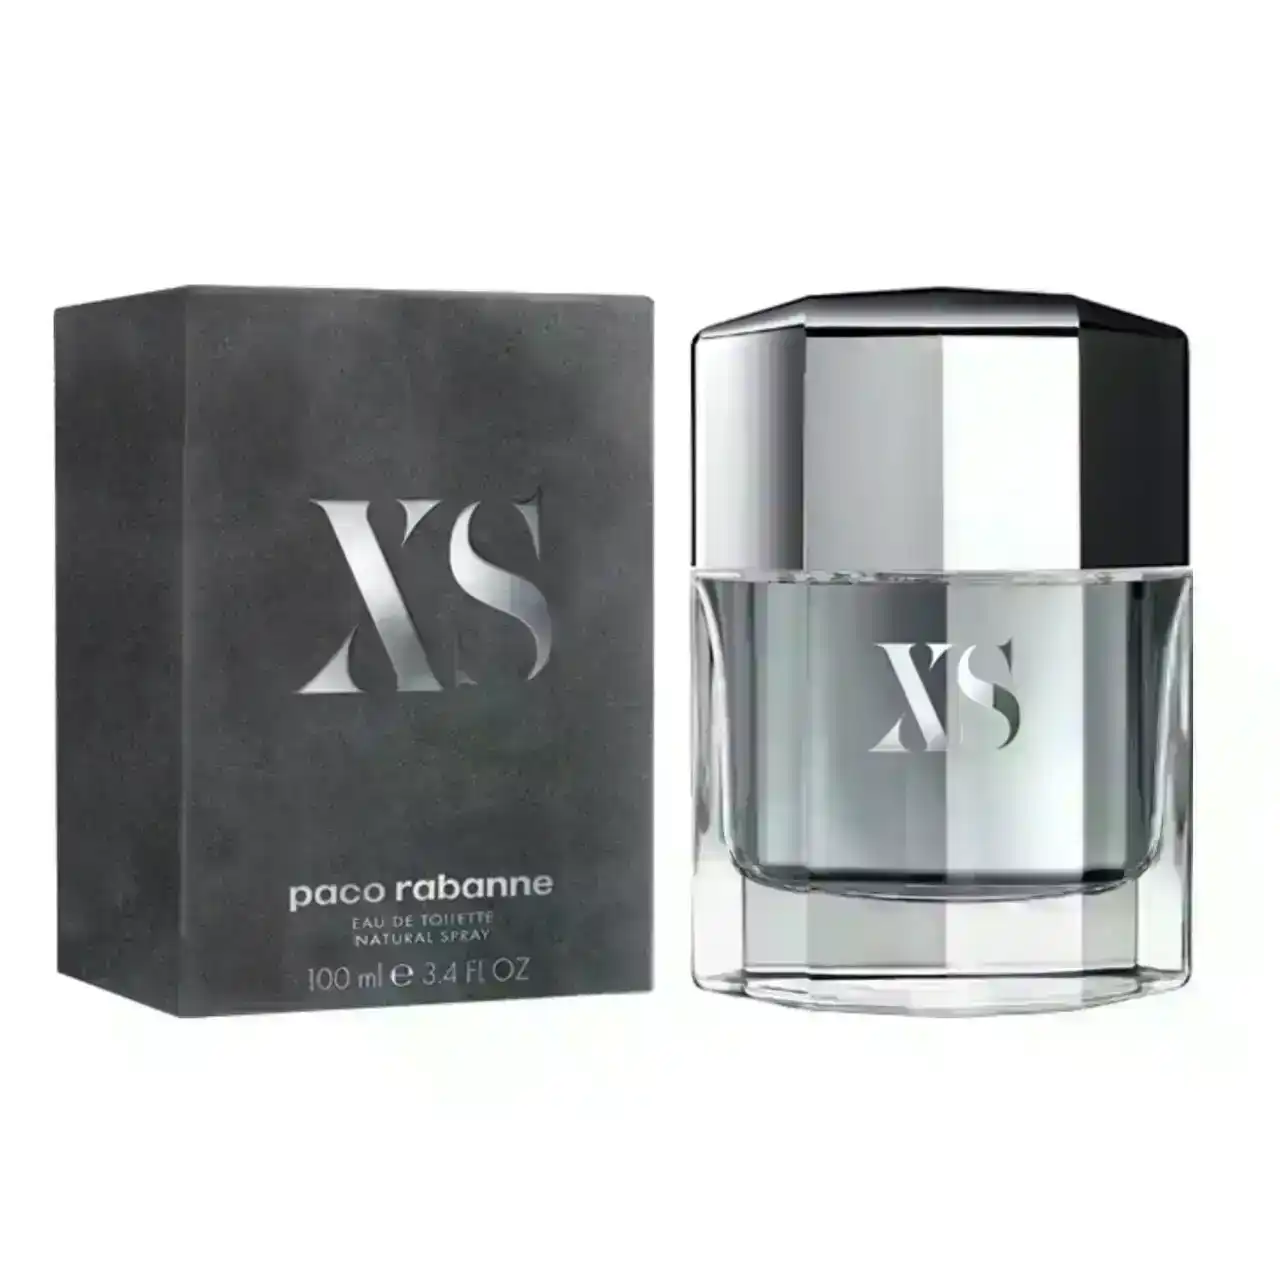 XS Paco Rabanne 100ml EDT By Paco Rabanne (Mens)